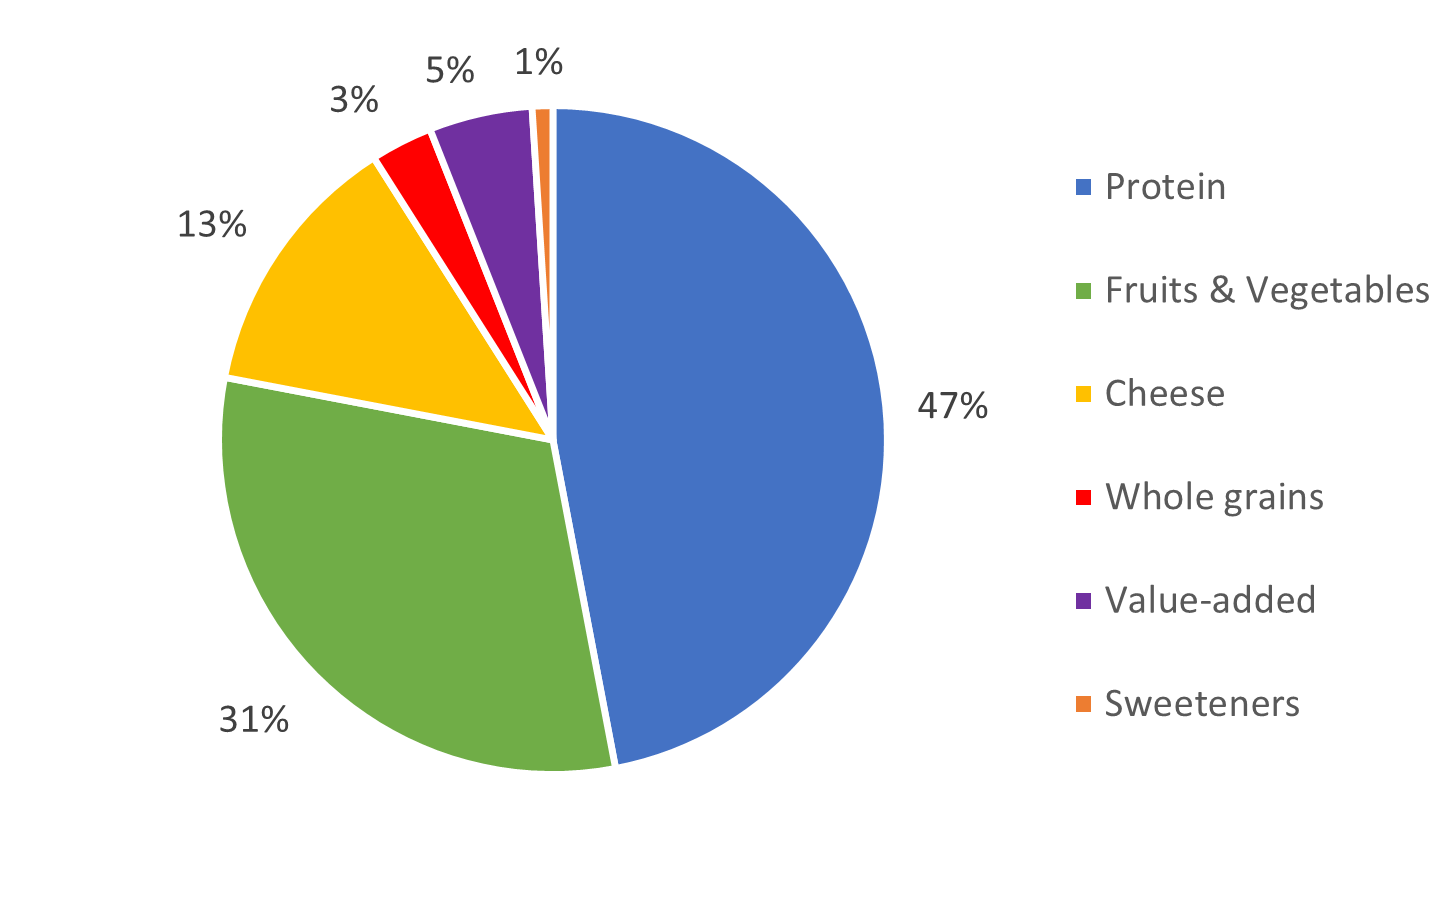 Pie chart showing 47% of purchase dollars went to Protein, 31% to Fruits & Vegetables, 13% to Cheese, 3% to Whole grains, 5% to Value-added and 1% to Sweeteners.